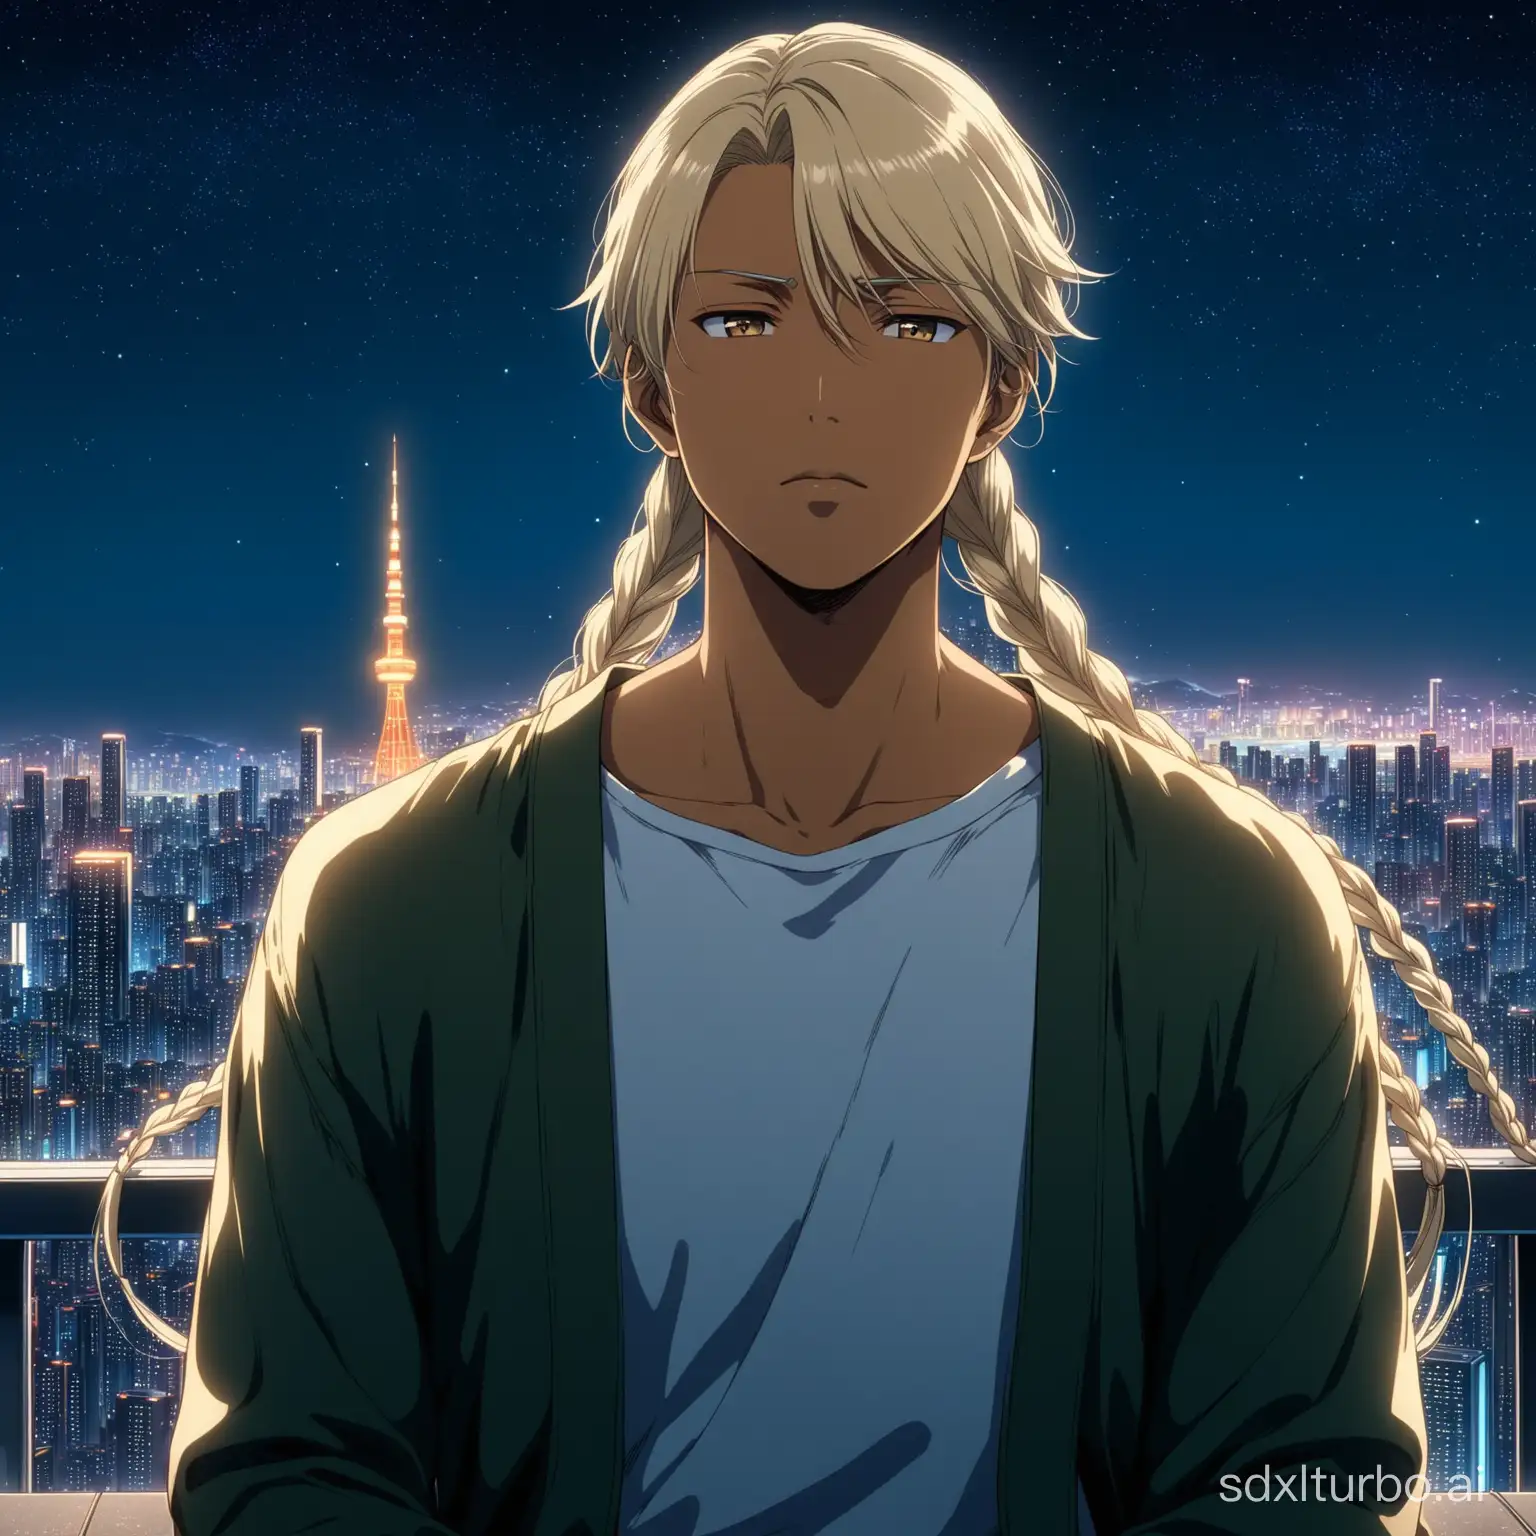 Japanese man, light brown skin, meditating, platinum blonde hair, long braids, handsome, sci-fi city background, night, tall buildings with lights Anime Key Visual, Japanese Manga, Anime art, anime, anime masterpiece, pixiv, soft lighting, intricate detail, highly detailed, anime art, 4k, high quality